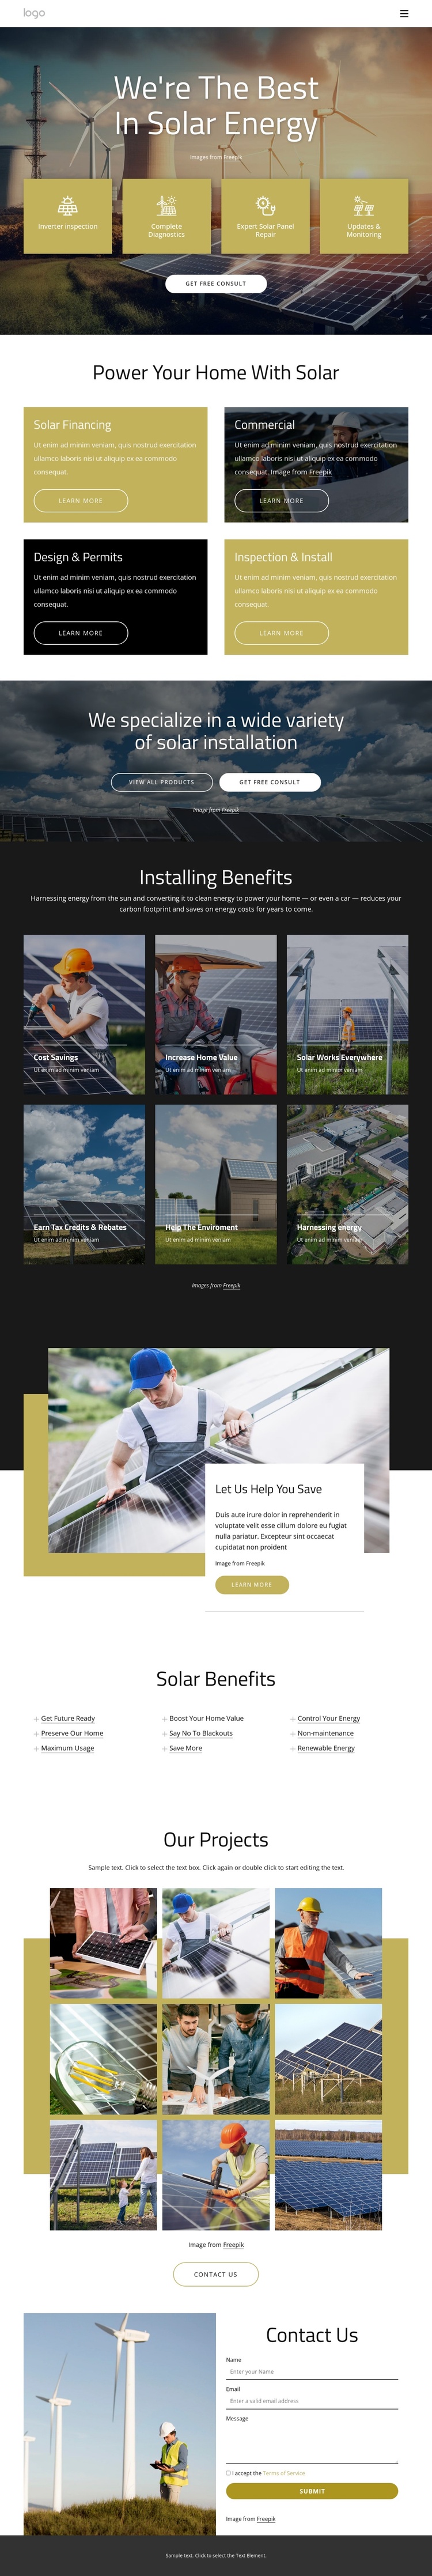 We are the best in solar energy Joomla Template